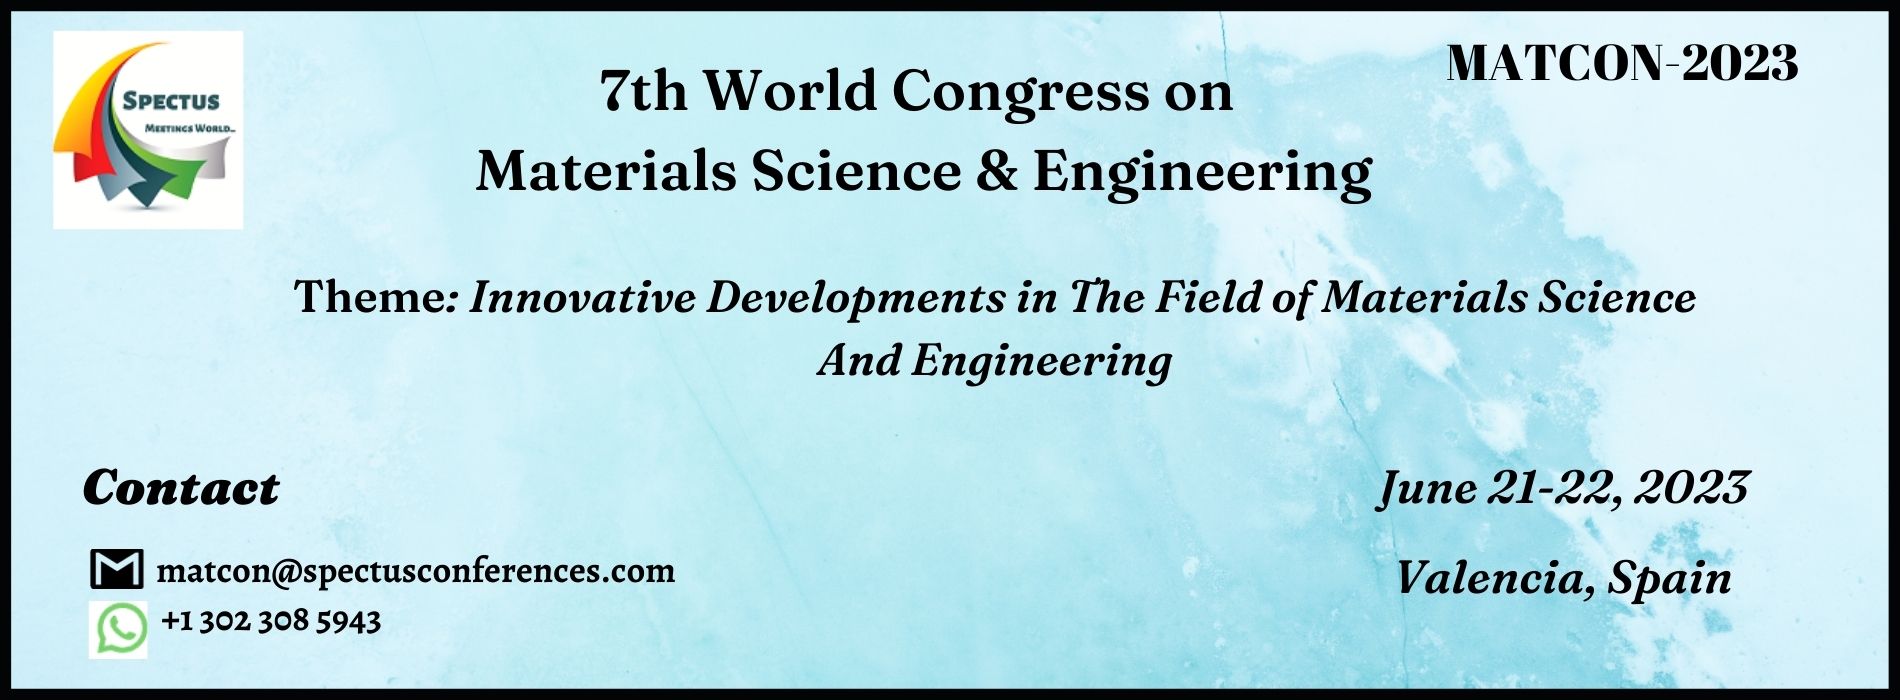 7th World Congress on Materials Science & Engineering